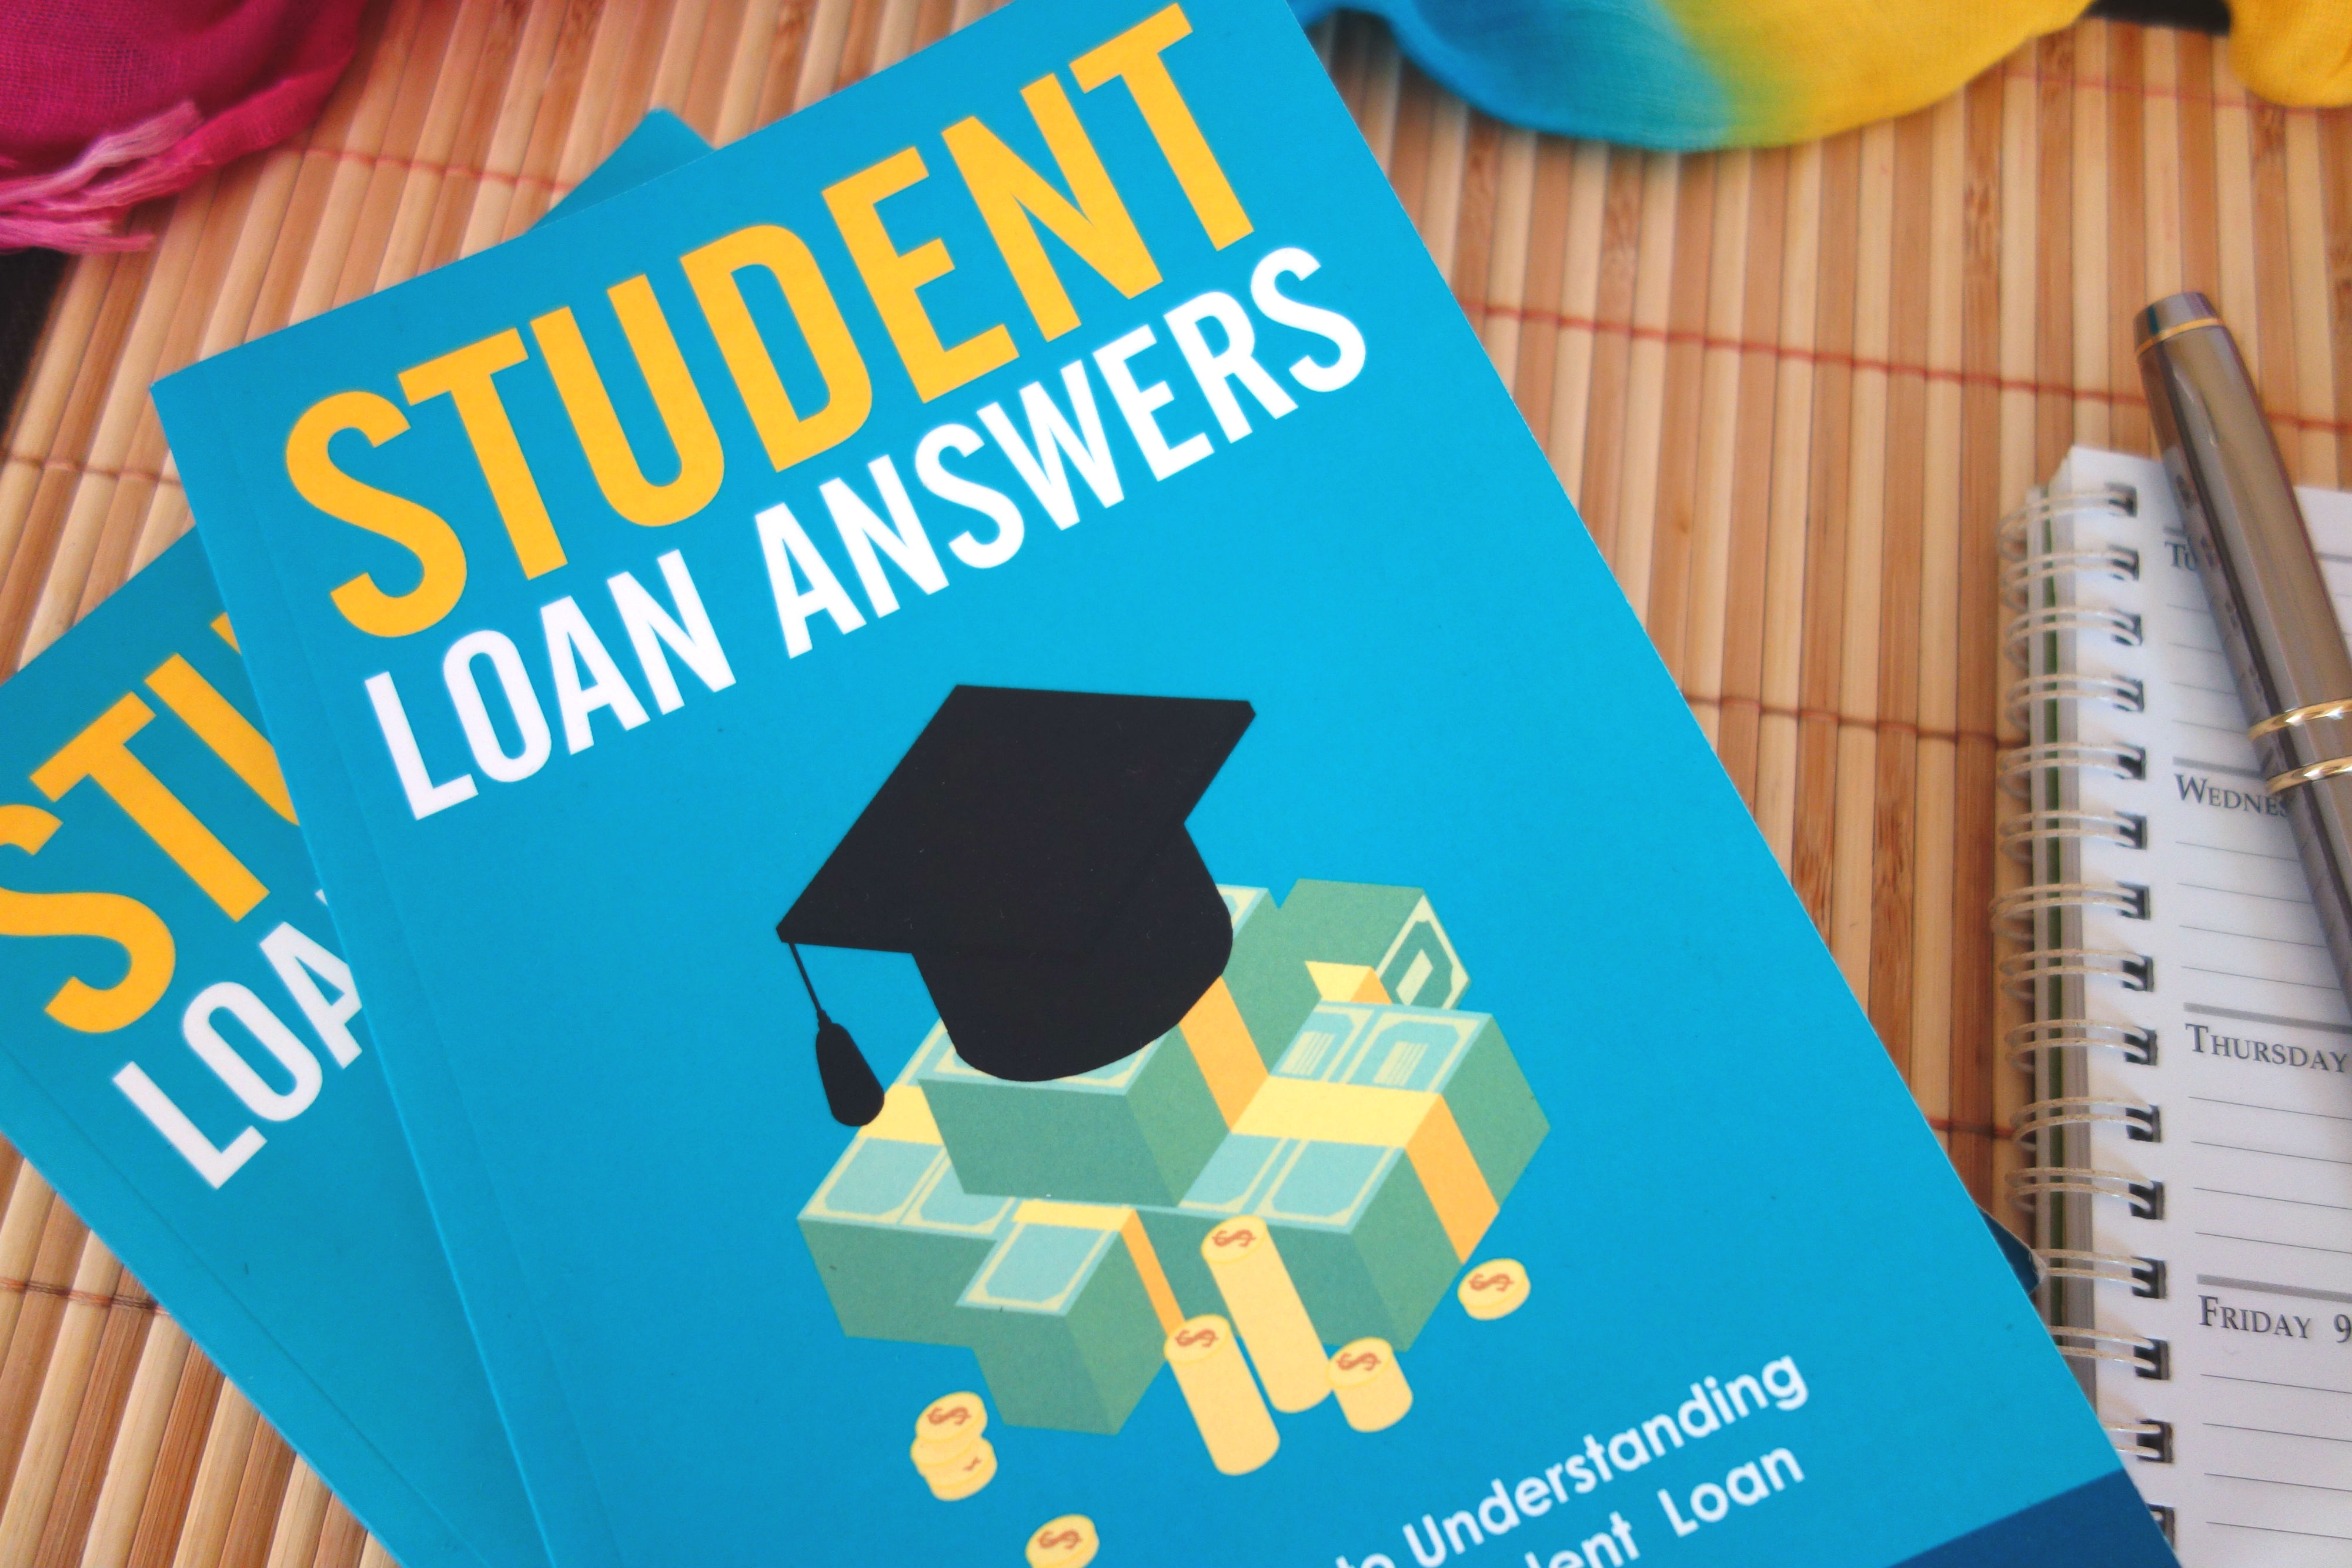 Student Loan Answers Book Review & Giveaway